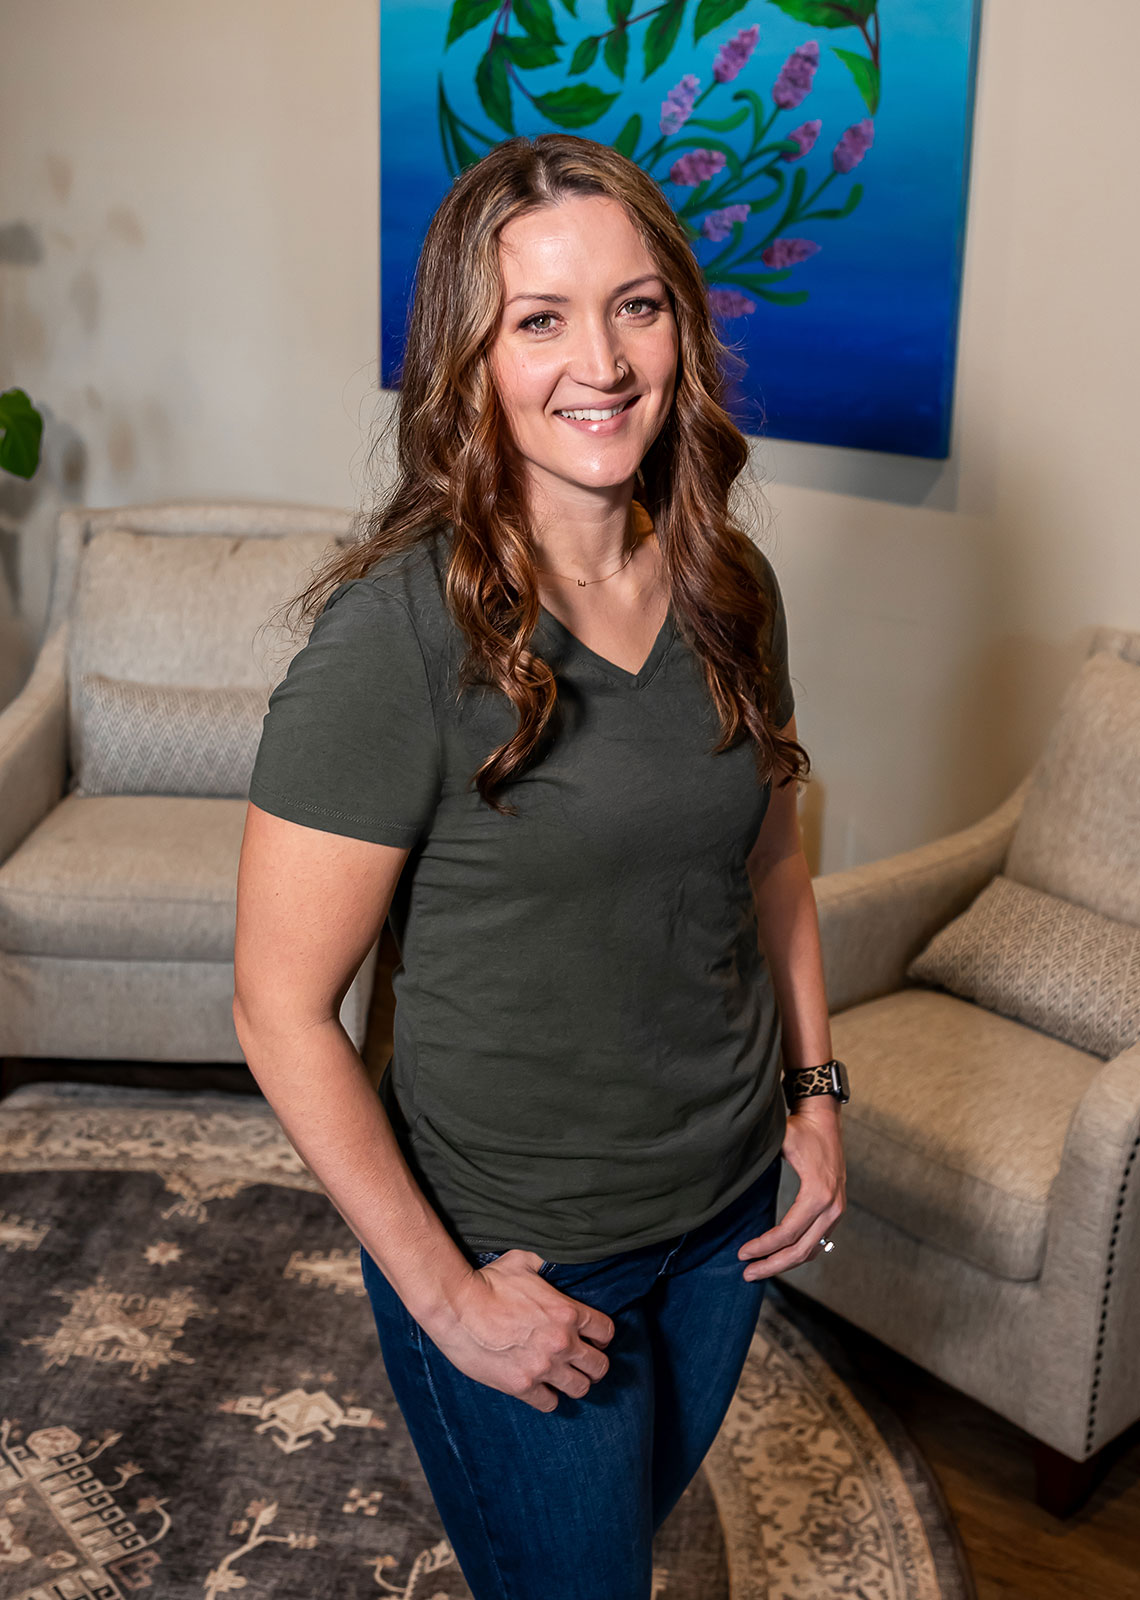 Christa - Massage therapist at Nearing Total Health